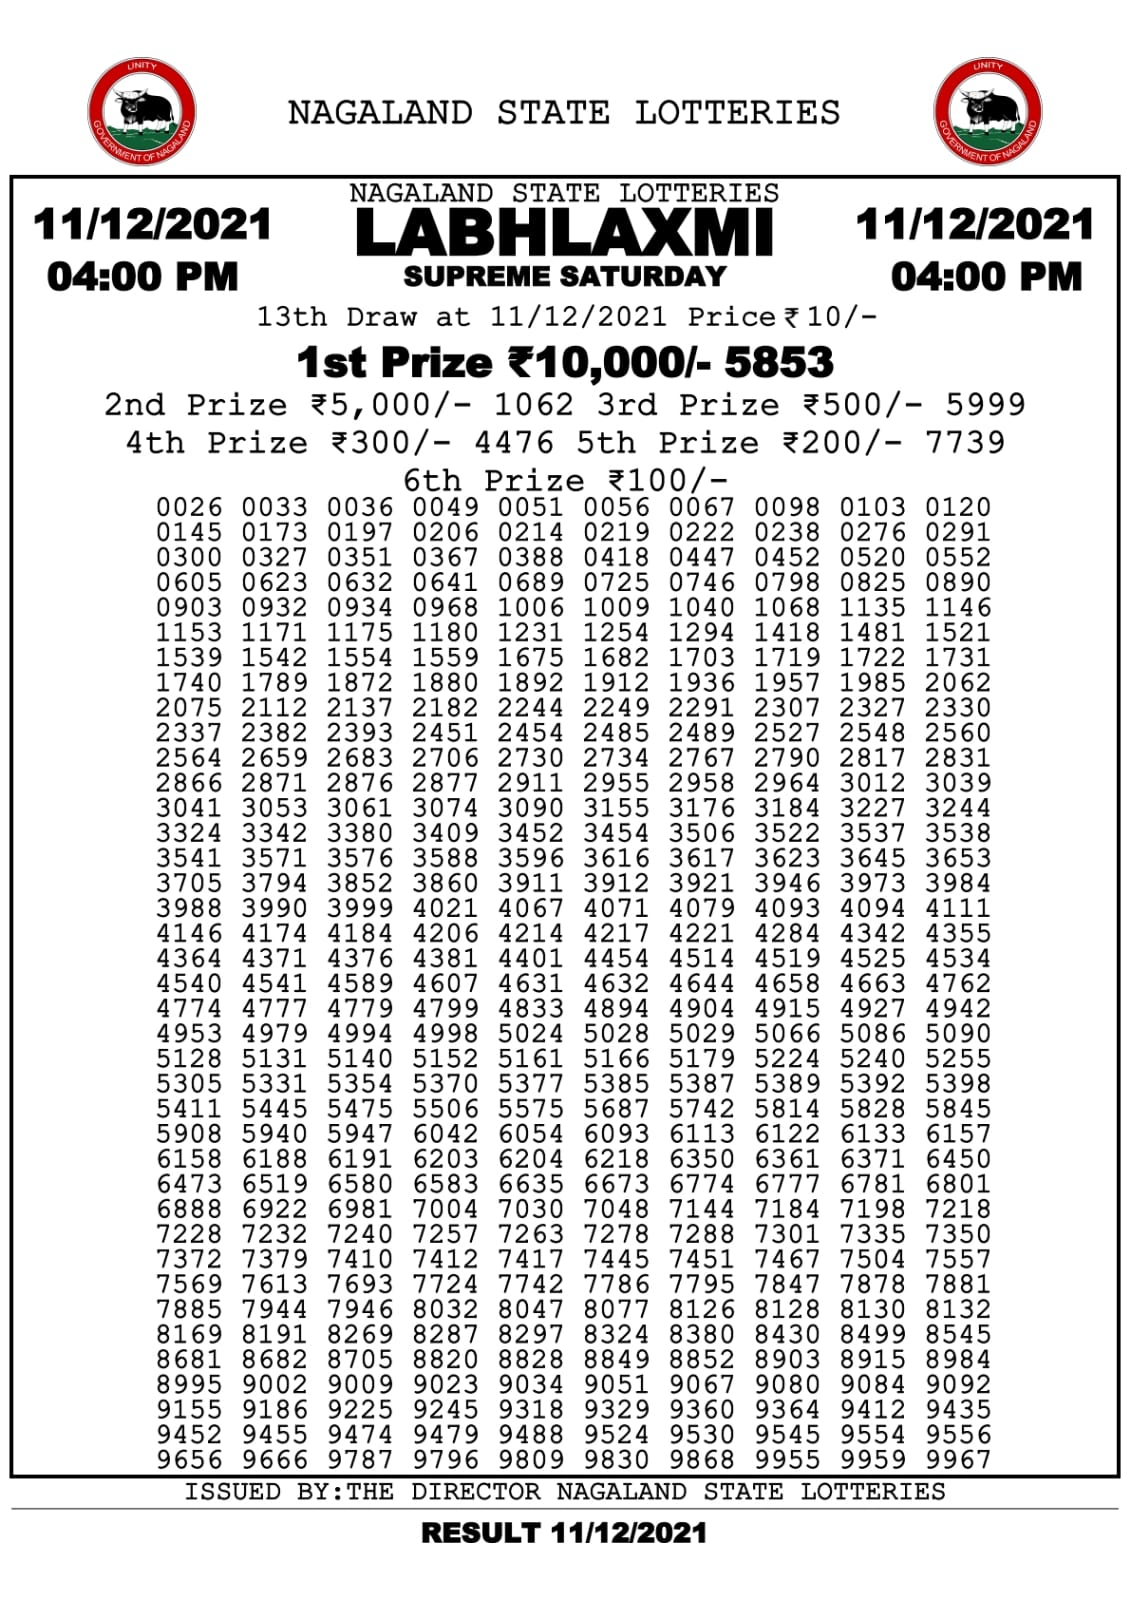 Labhlaxmi 4.00pm Lottery Result 11.12.2021